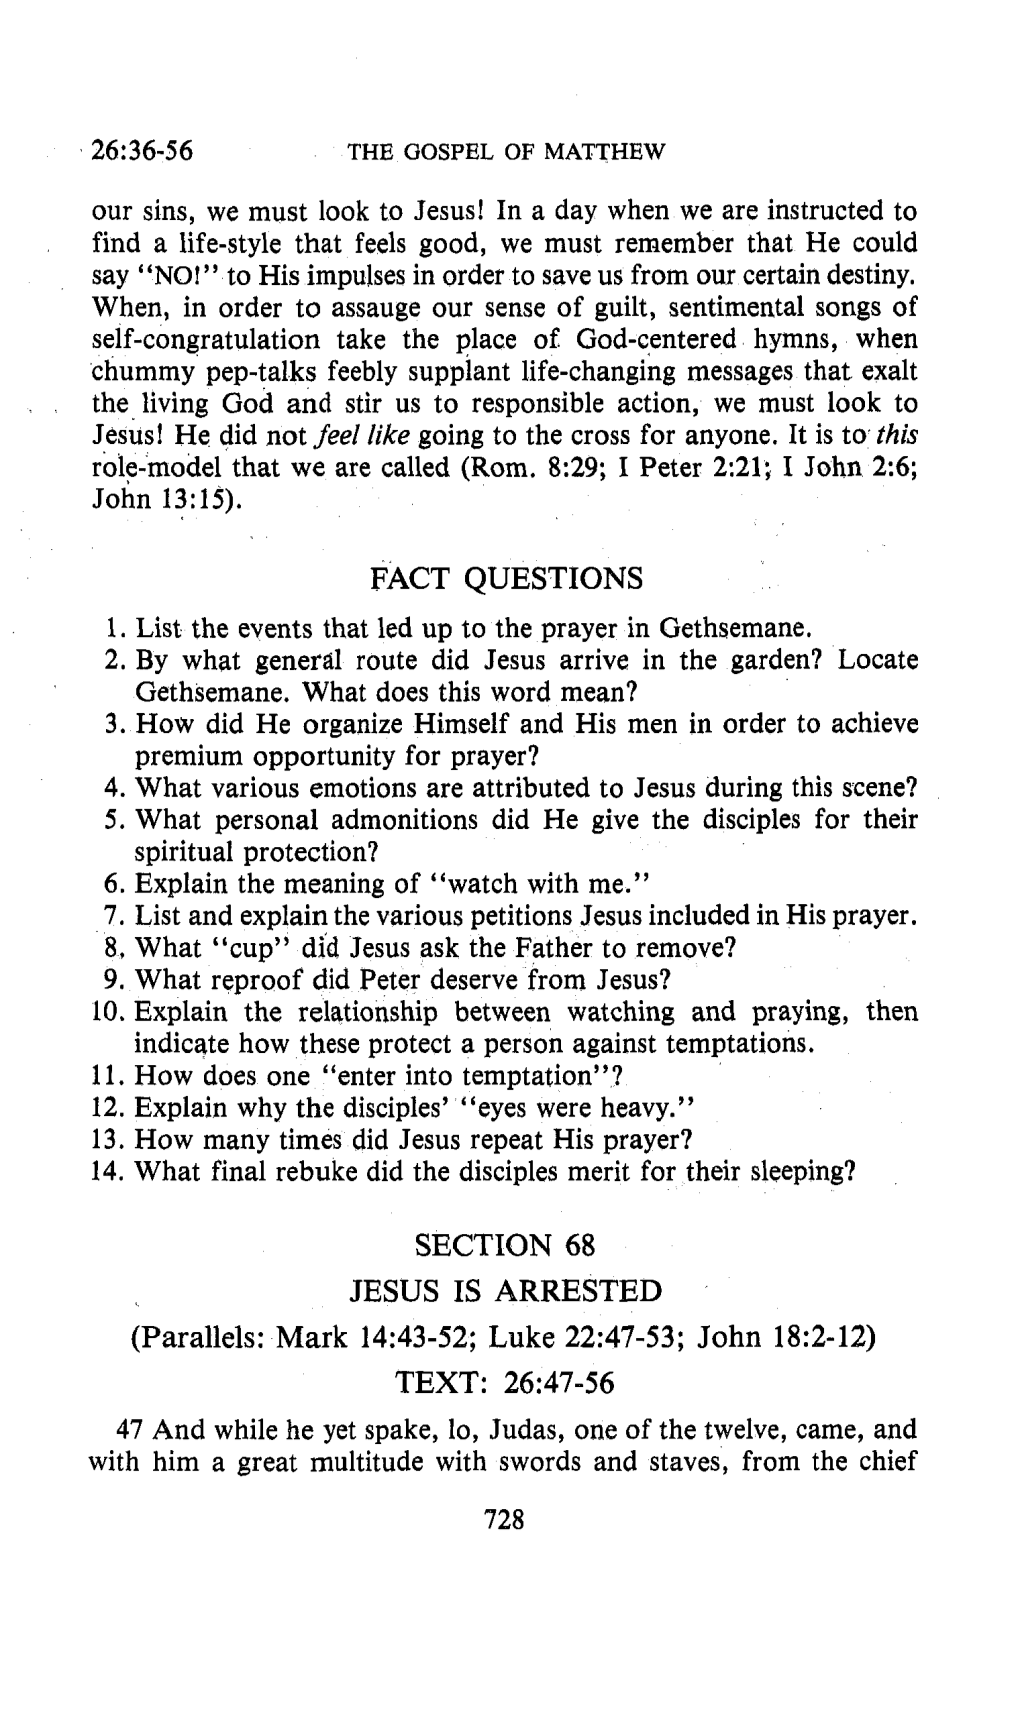 Fact Questions Section 68 Jesus Is Arrested